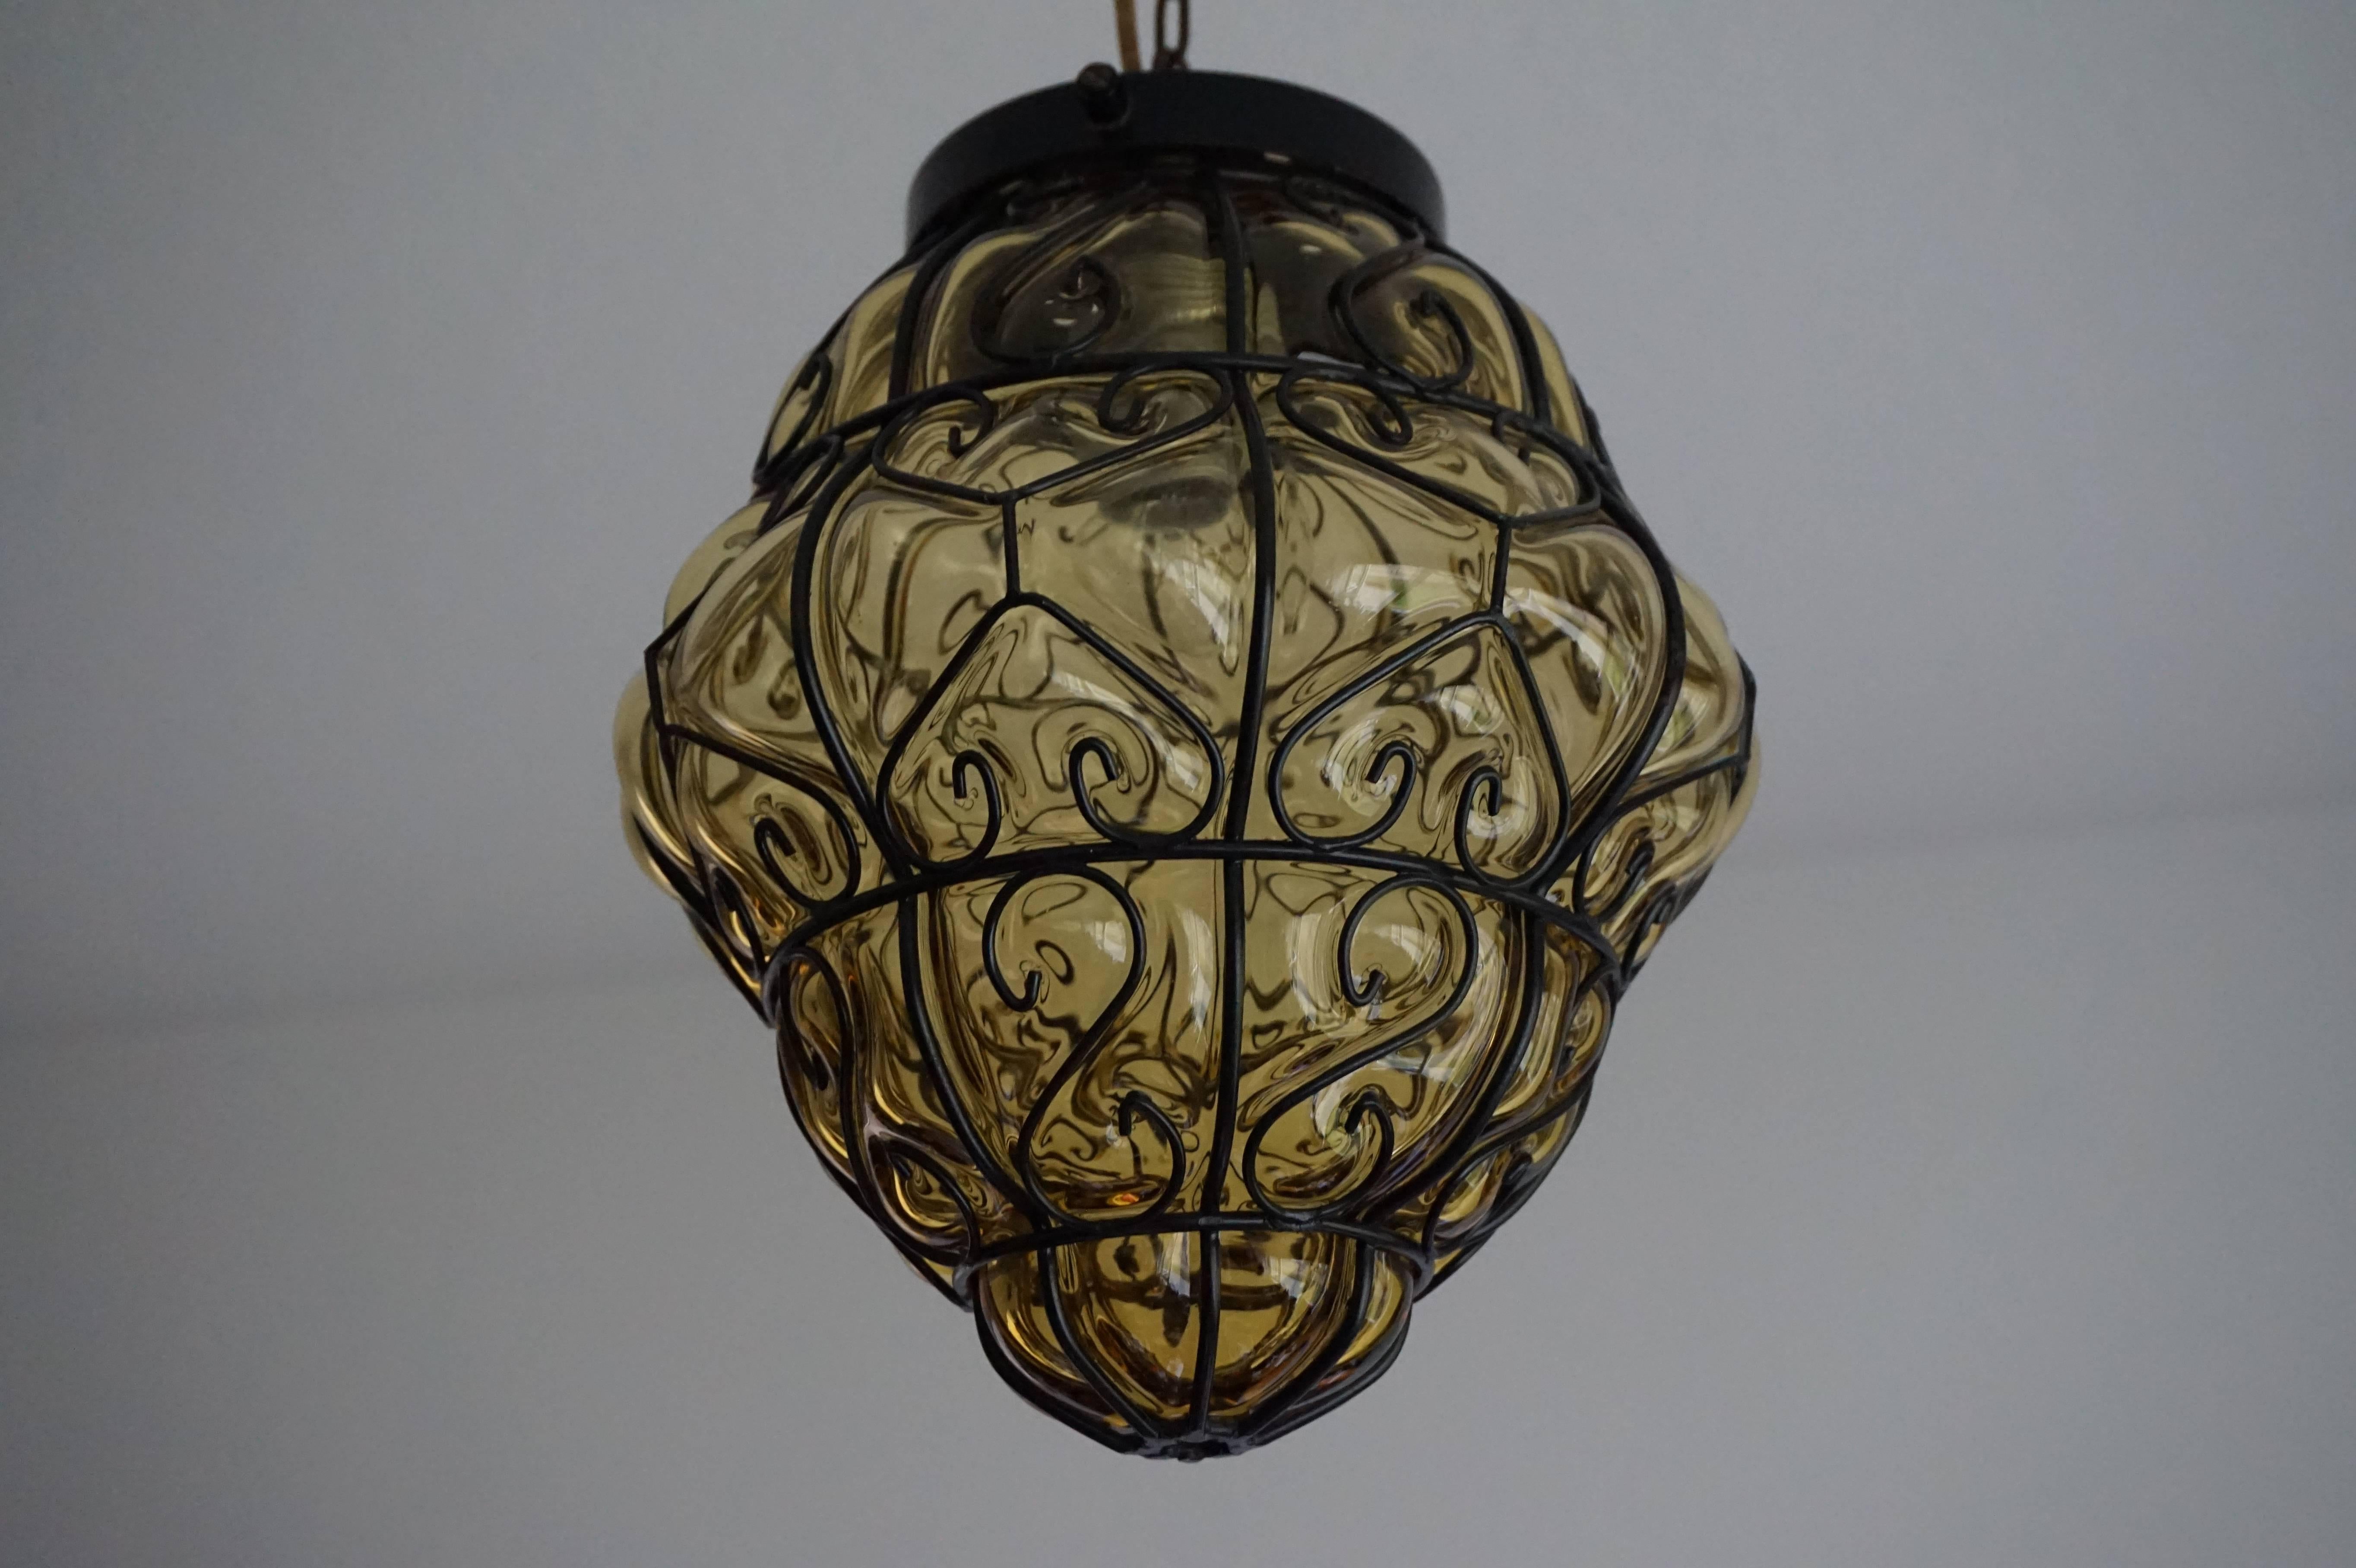 This little Venetian beauty is in mint condition.

This stunning, single light midcentury pendant is beautiful both in shape and color. It comes with the original chain and black metal canopy and the light bulb can easily be replaced by unscrewing